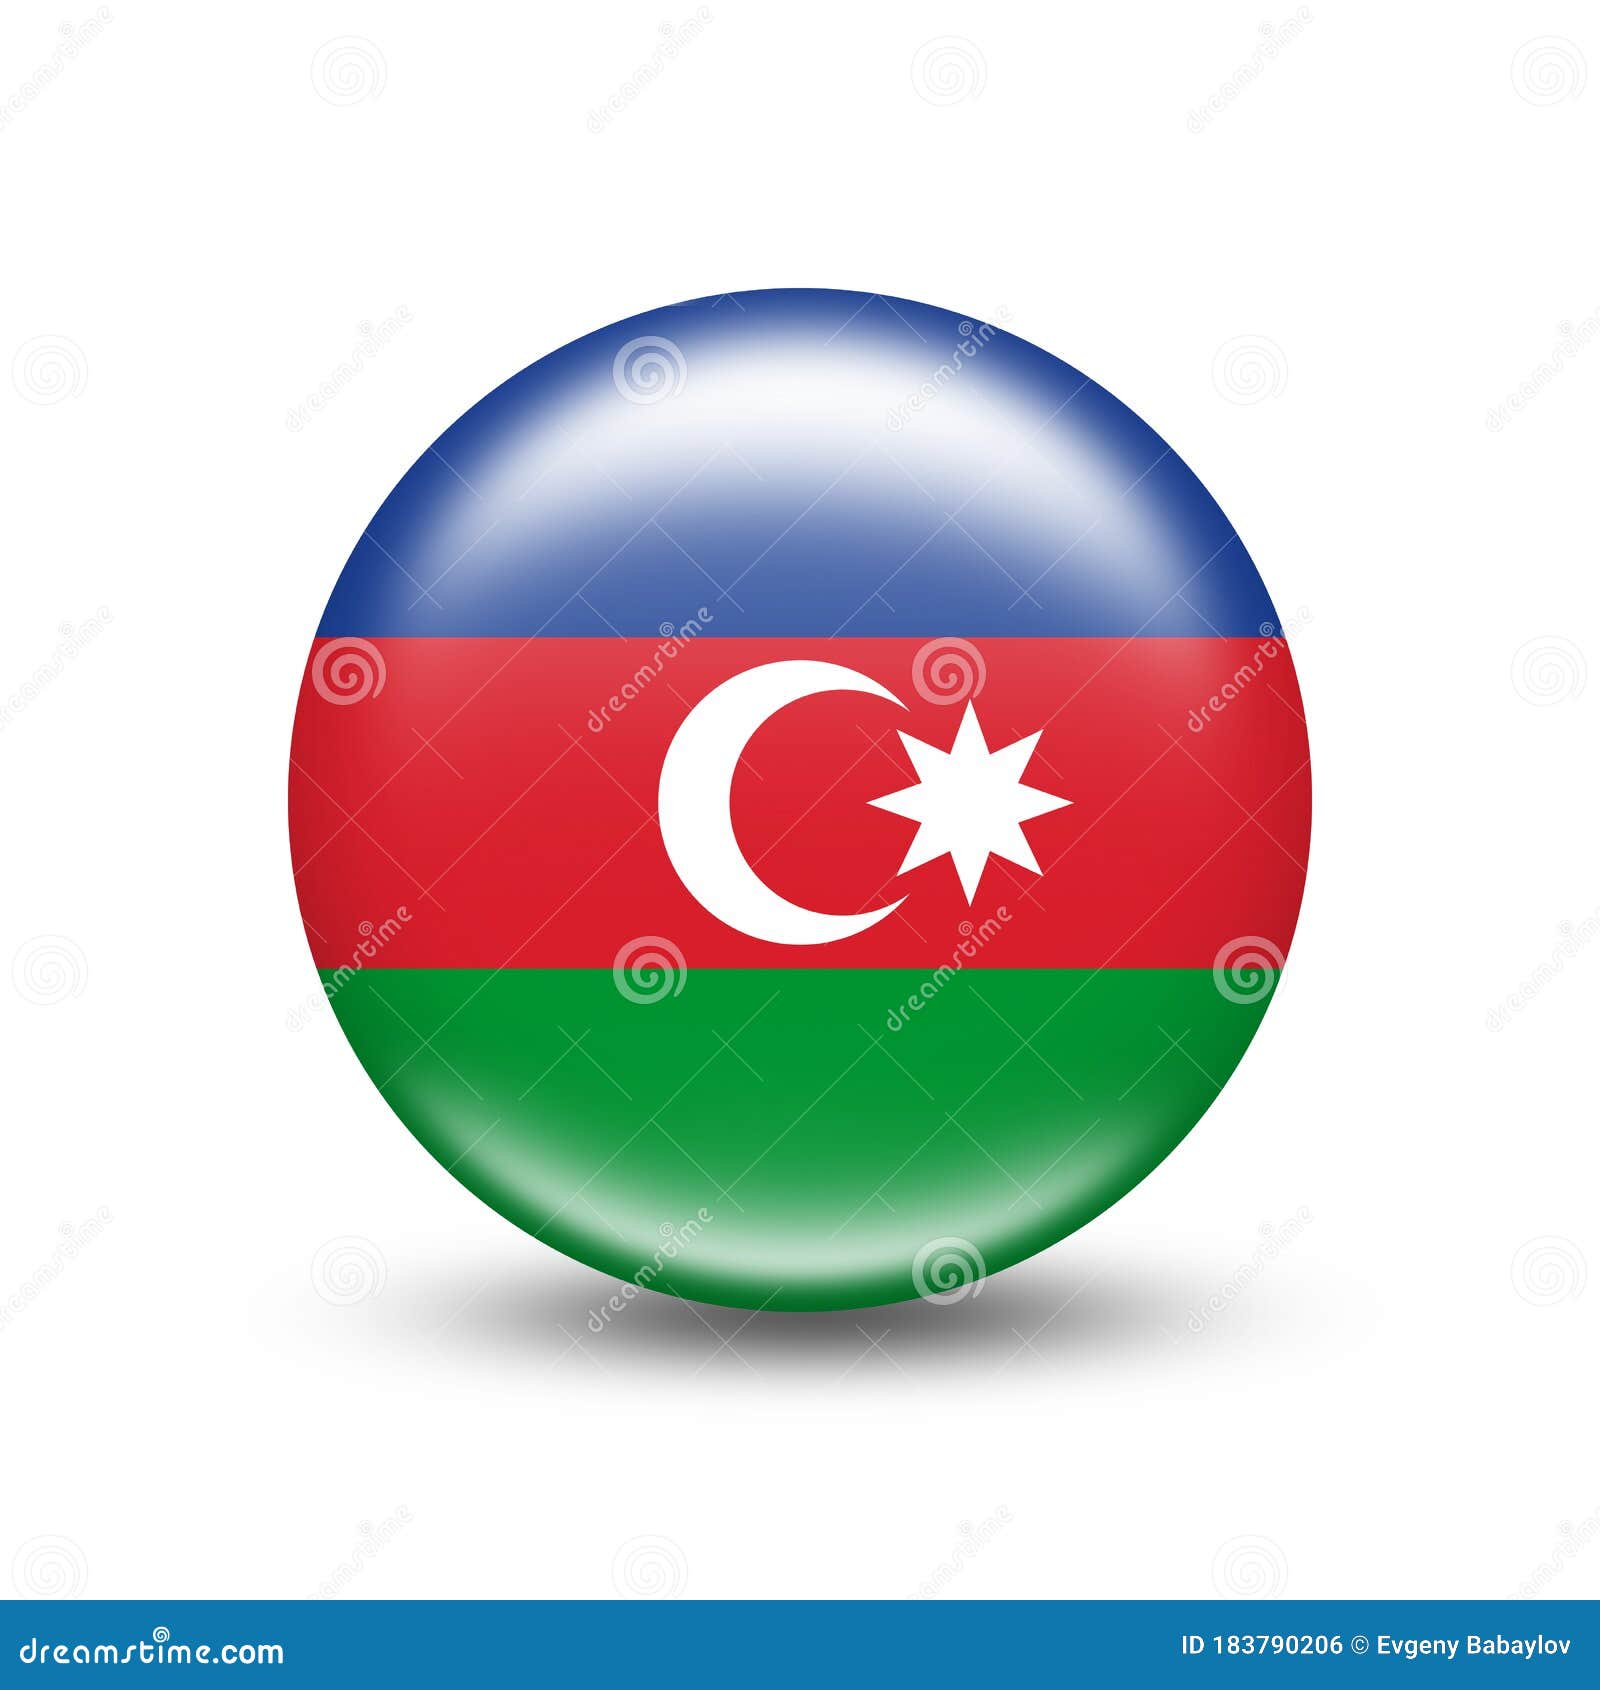 Azerbaijan Country Flag In Sphere With Shadow Stock Illustration Illustration Of Land Government 183790206